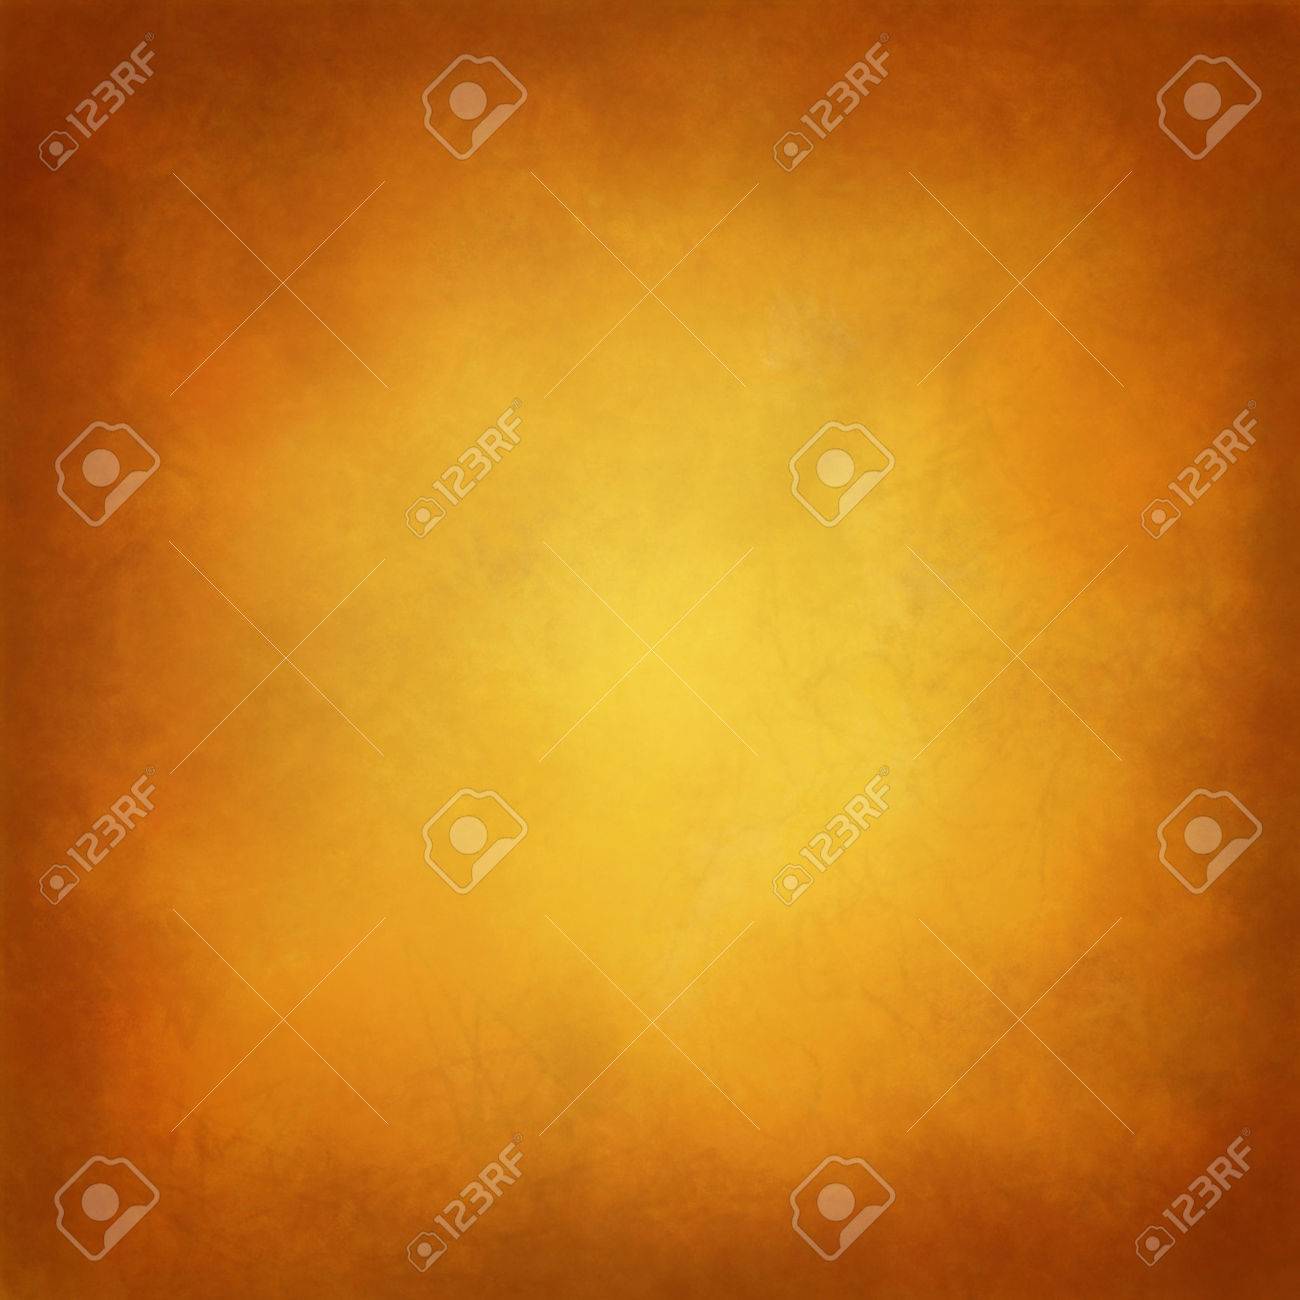 Gold Background With Orange And Brown Hues In Tuscan Style